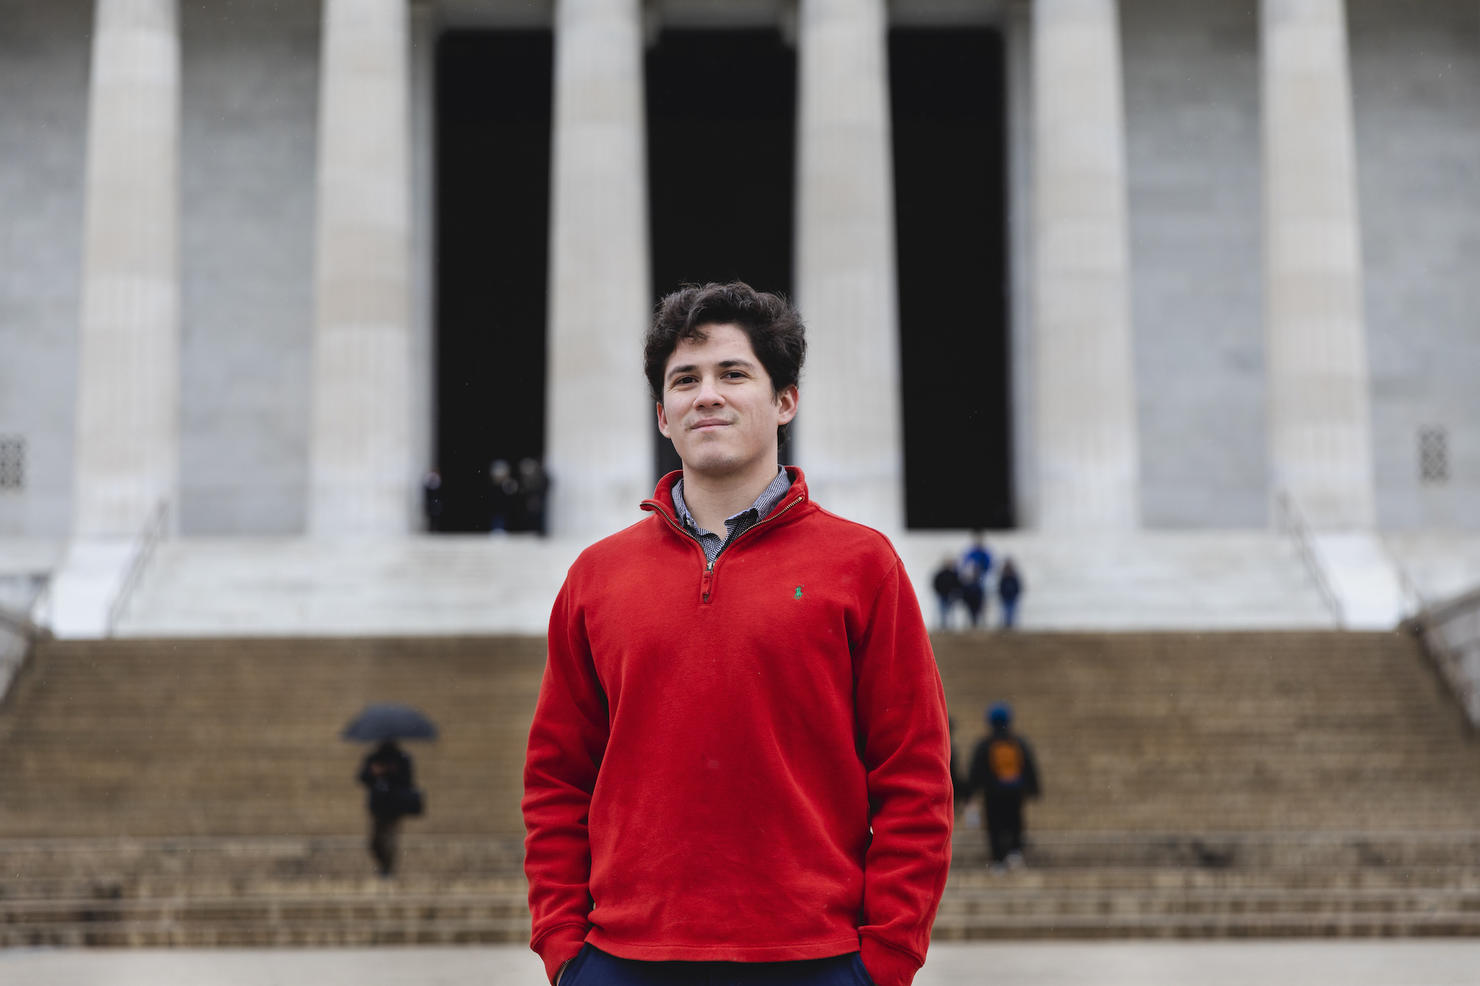 Yasser Aburdene standing on the steps in front of the Lincoln Memorial in Washington, D.C. His hands are in his pockets and he is wearing a red seater.